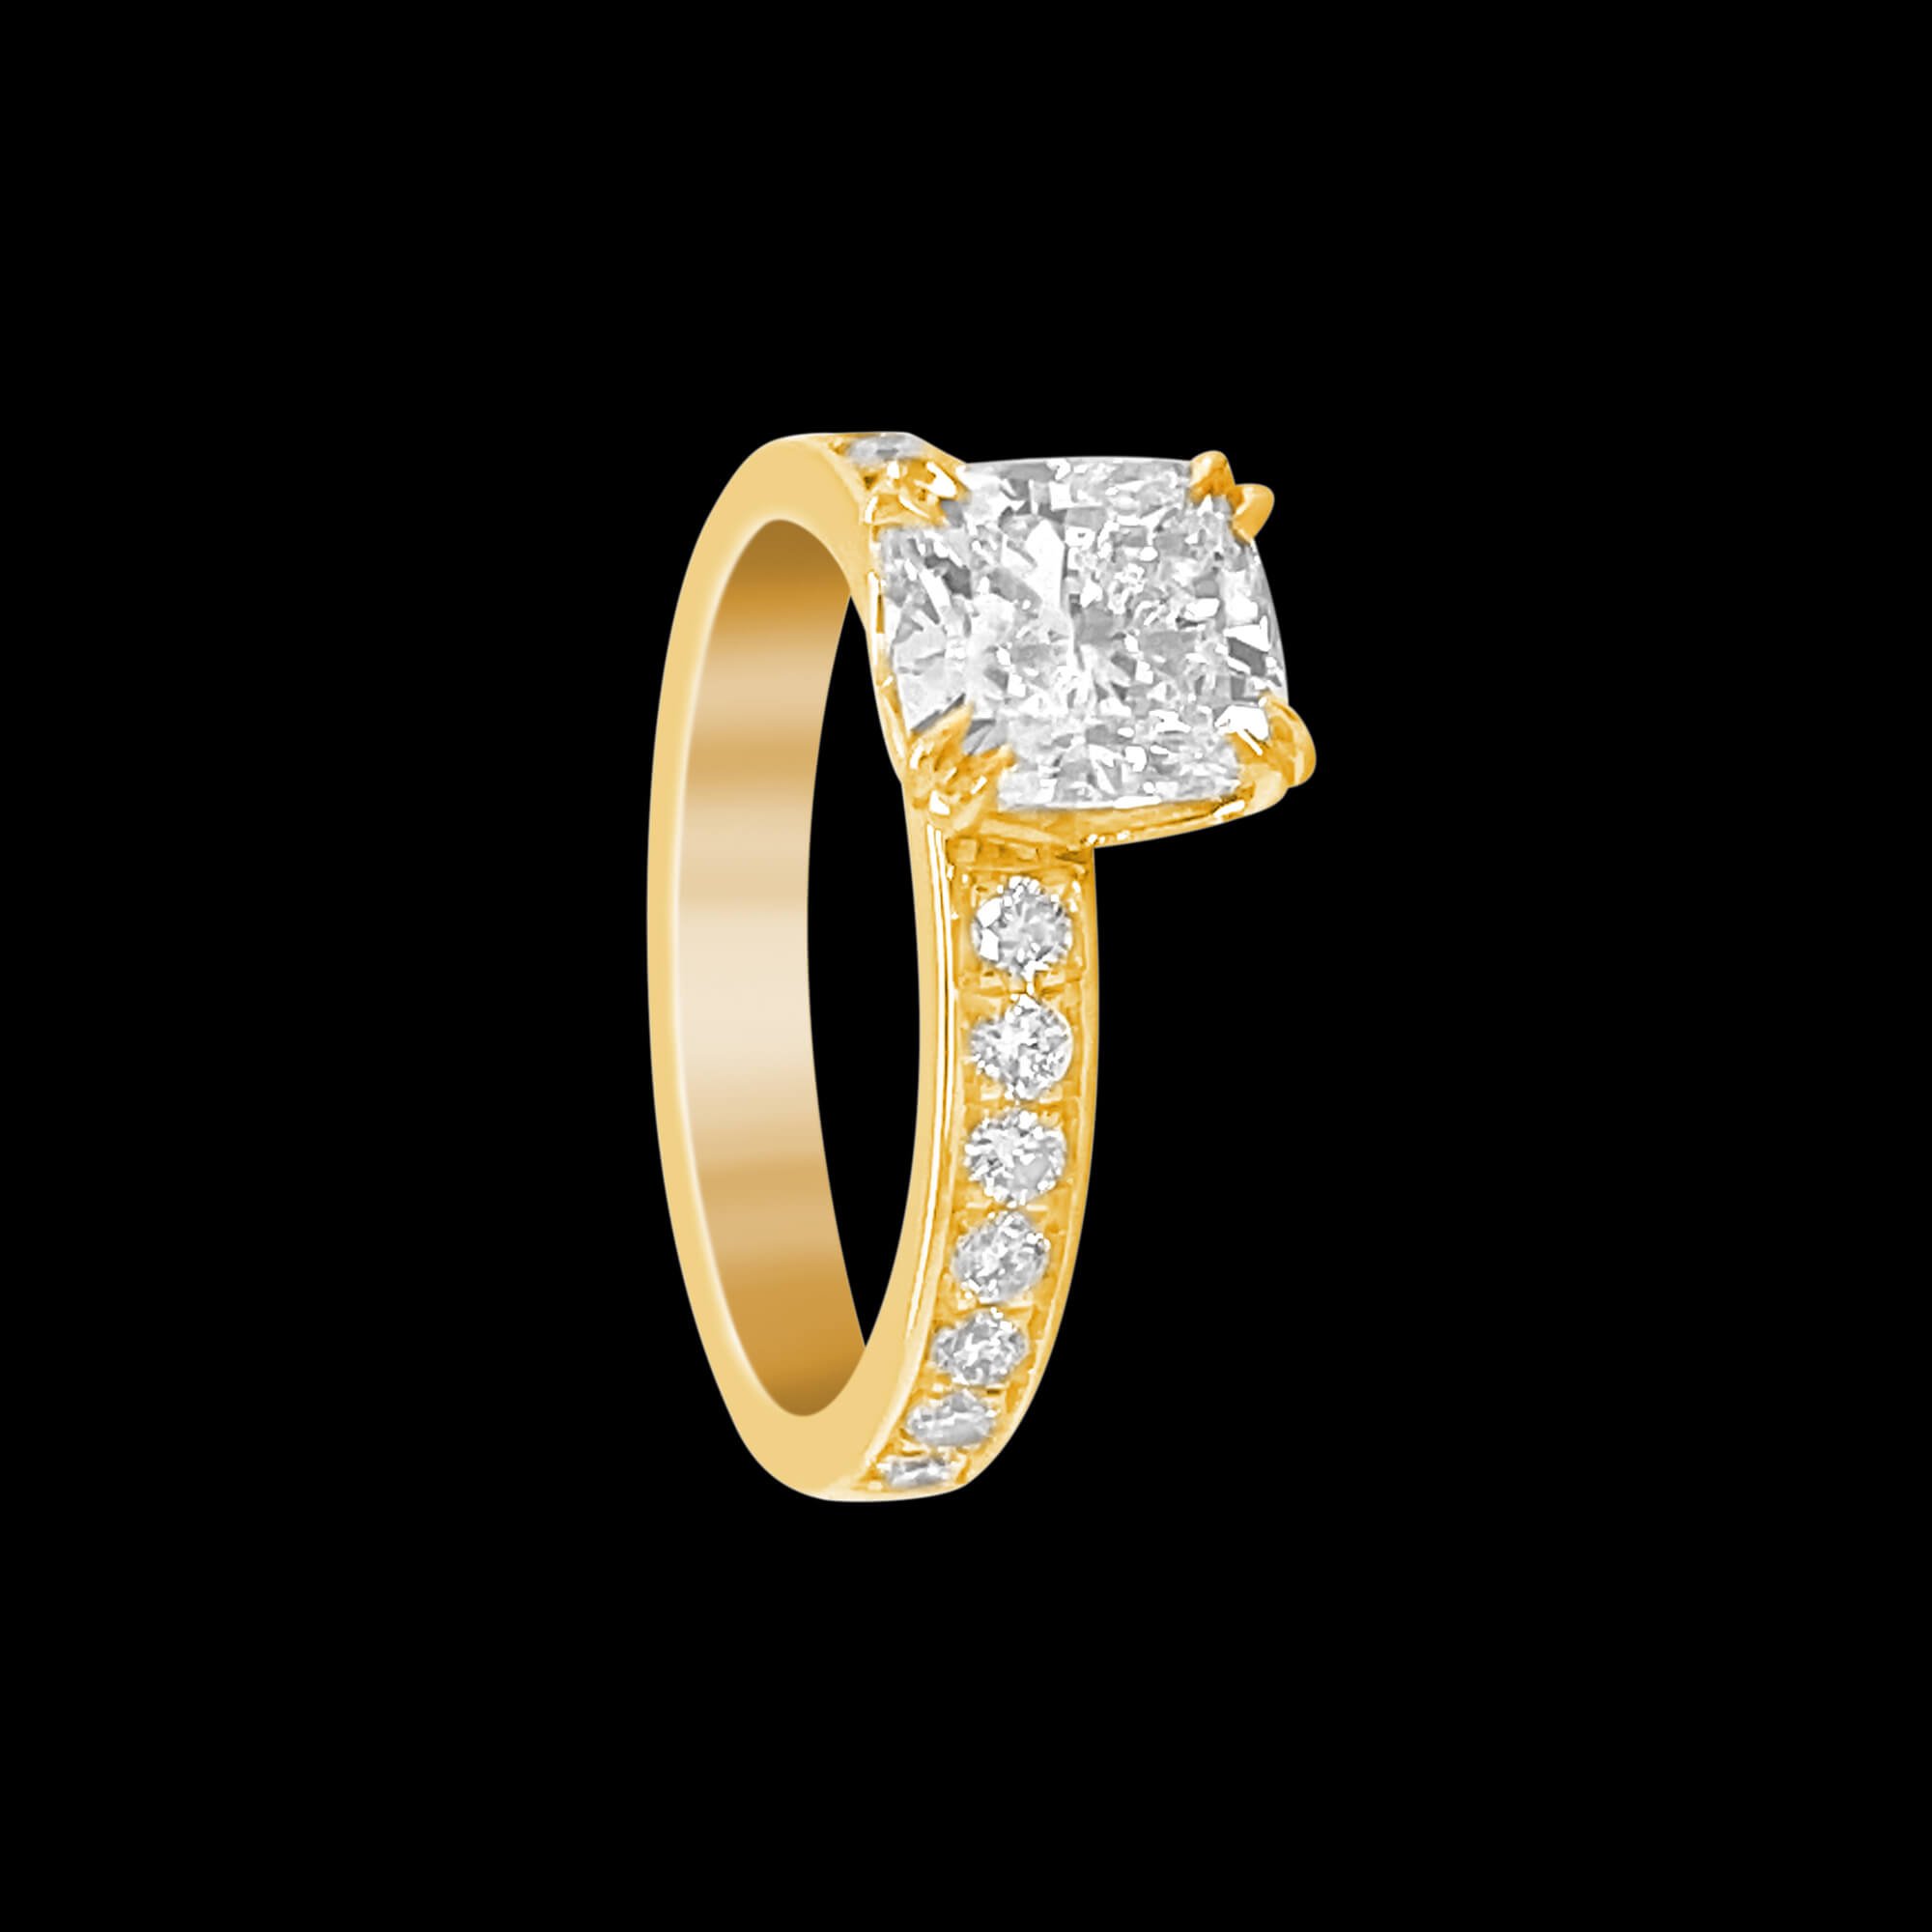 Bespoke 18kt yellow gold solitaire engagement ring with a 1.5ct cushion-cut diamond with a diamond shank | Classic Engagement. FRIDA | Fine Jewellery.jpg